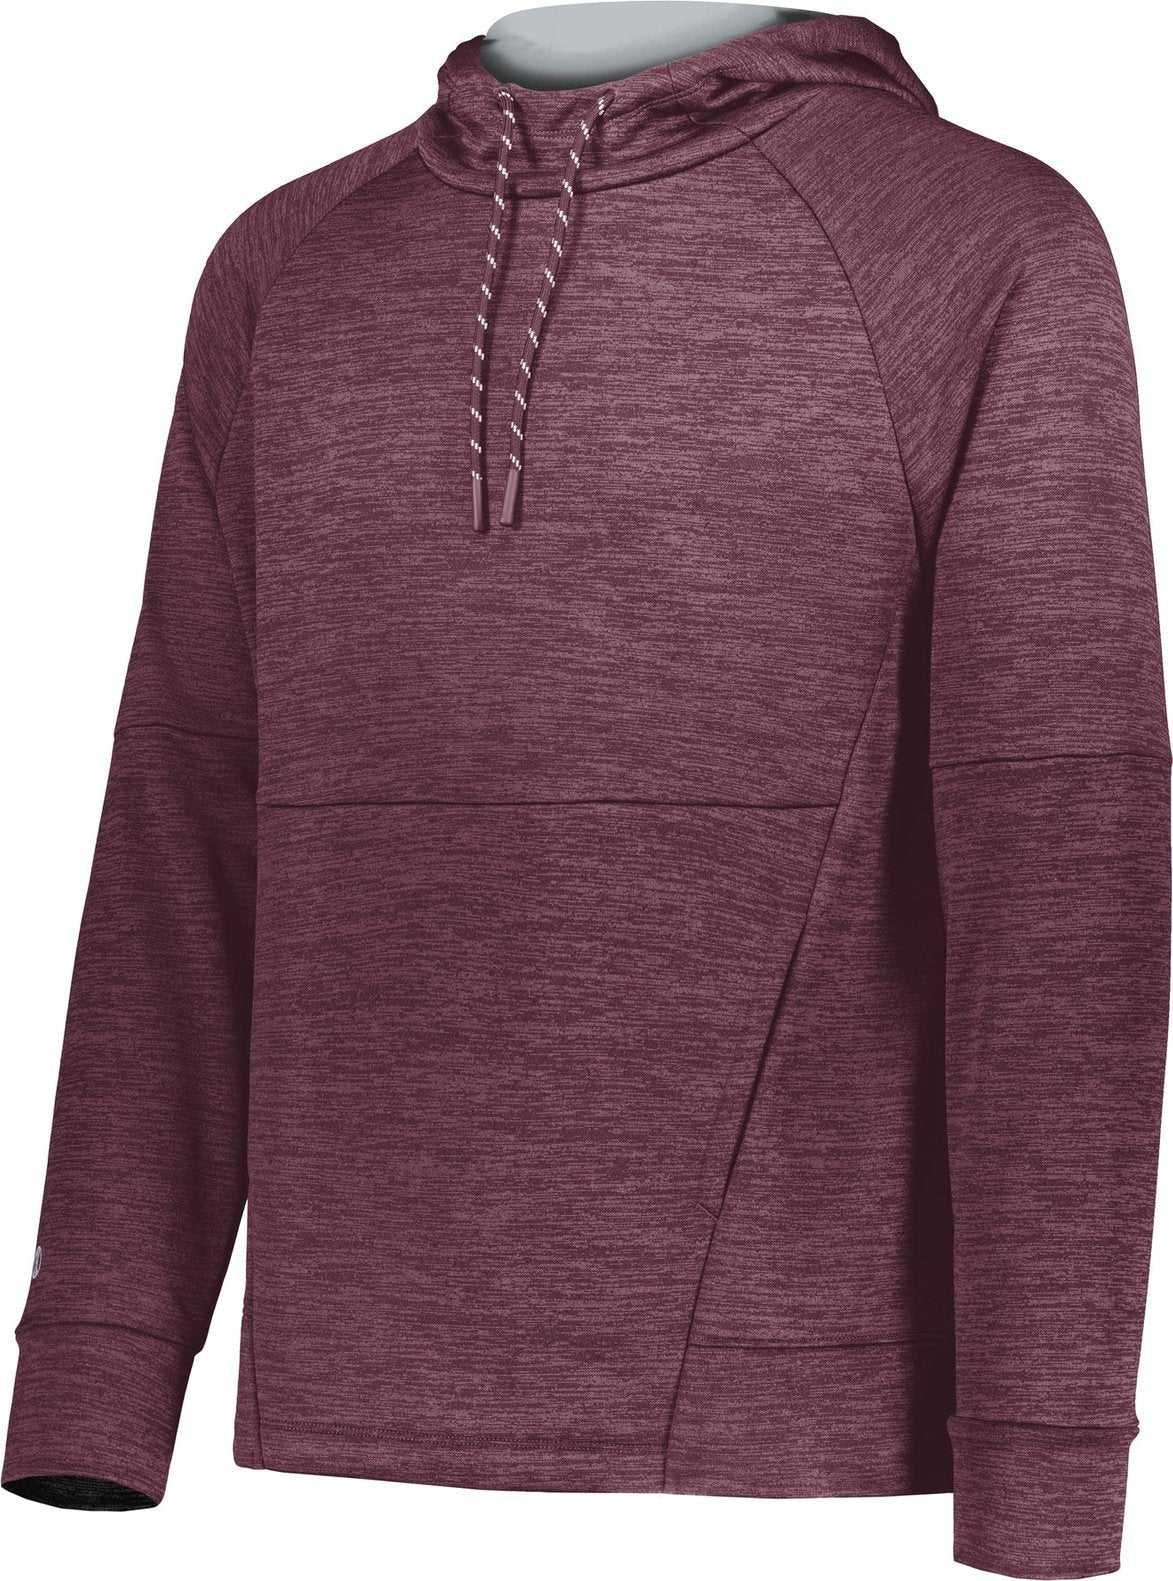 Holloway 223580 All Pro Performance Fleece Hoodie - Maroon Heather Silver - HIT a Double